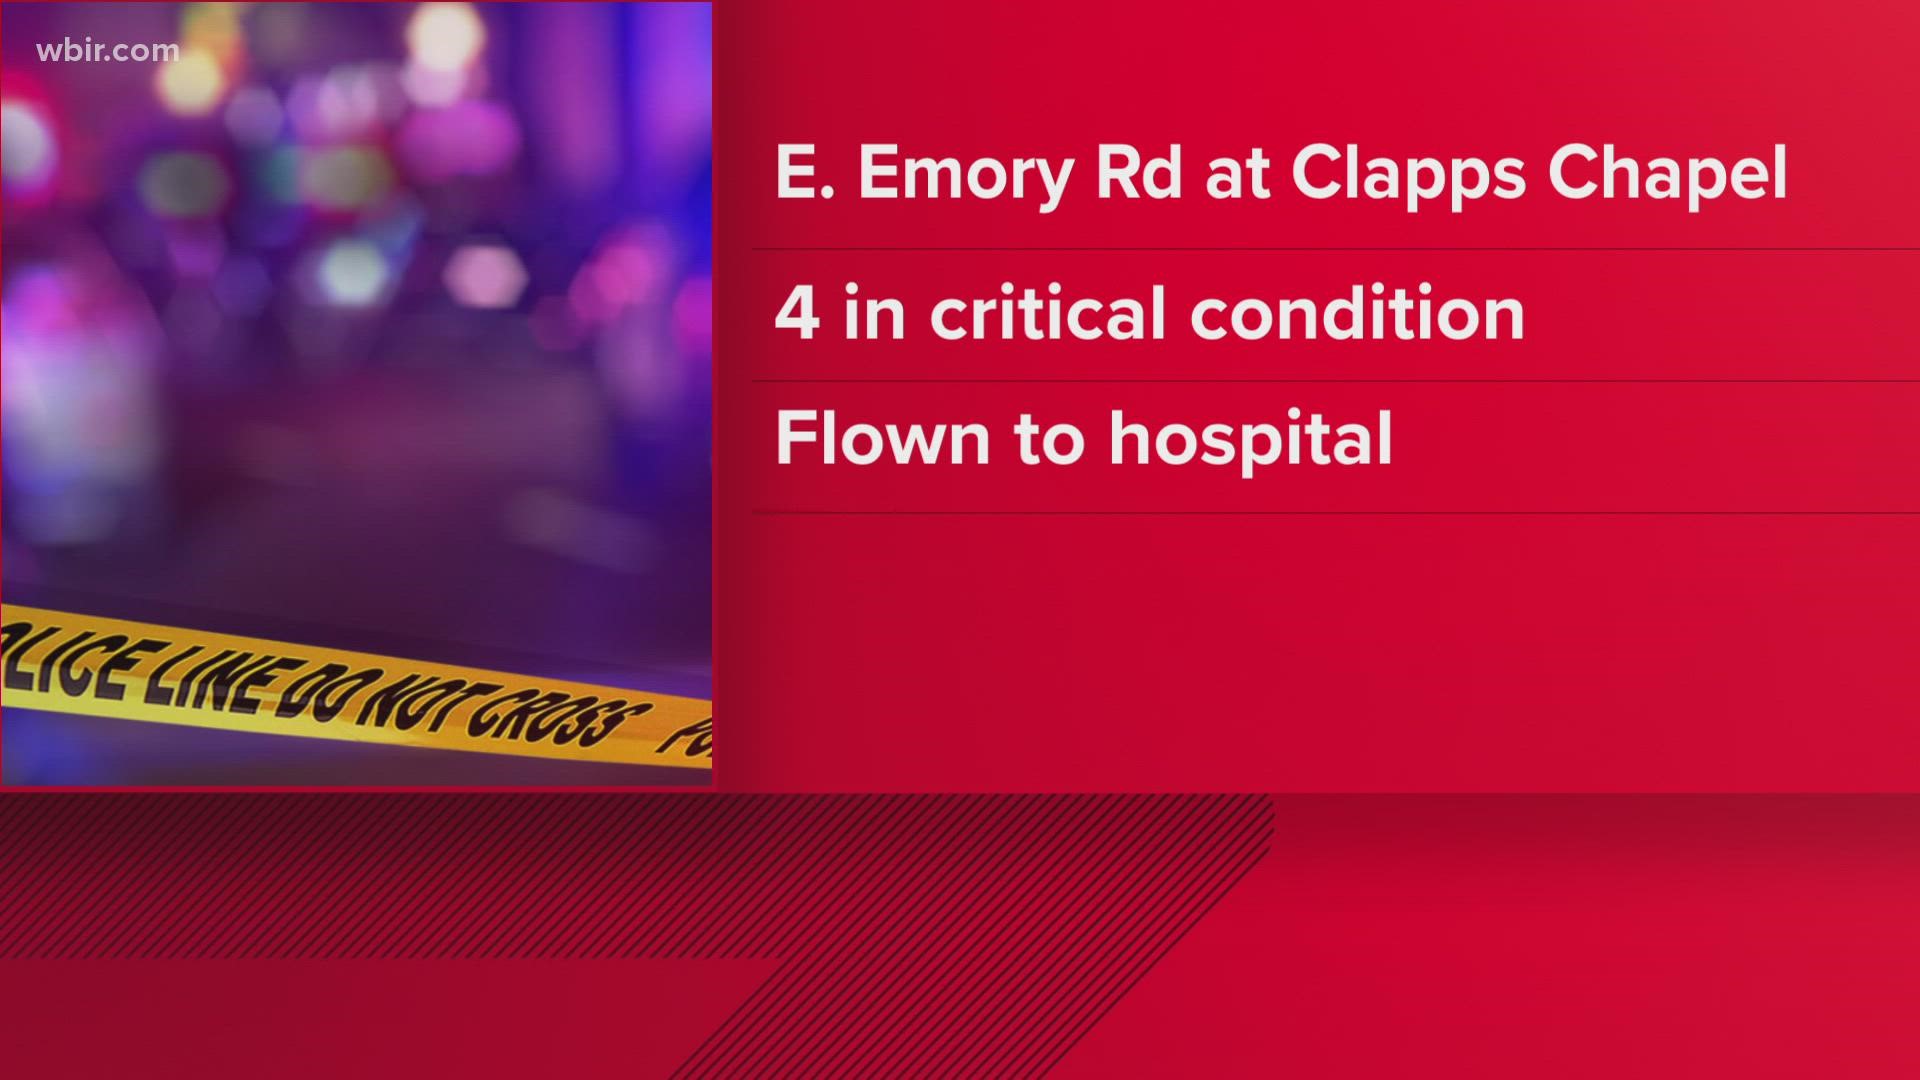 The crash occurred early Wednesday morning on E. Emory Road.